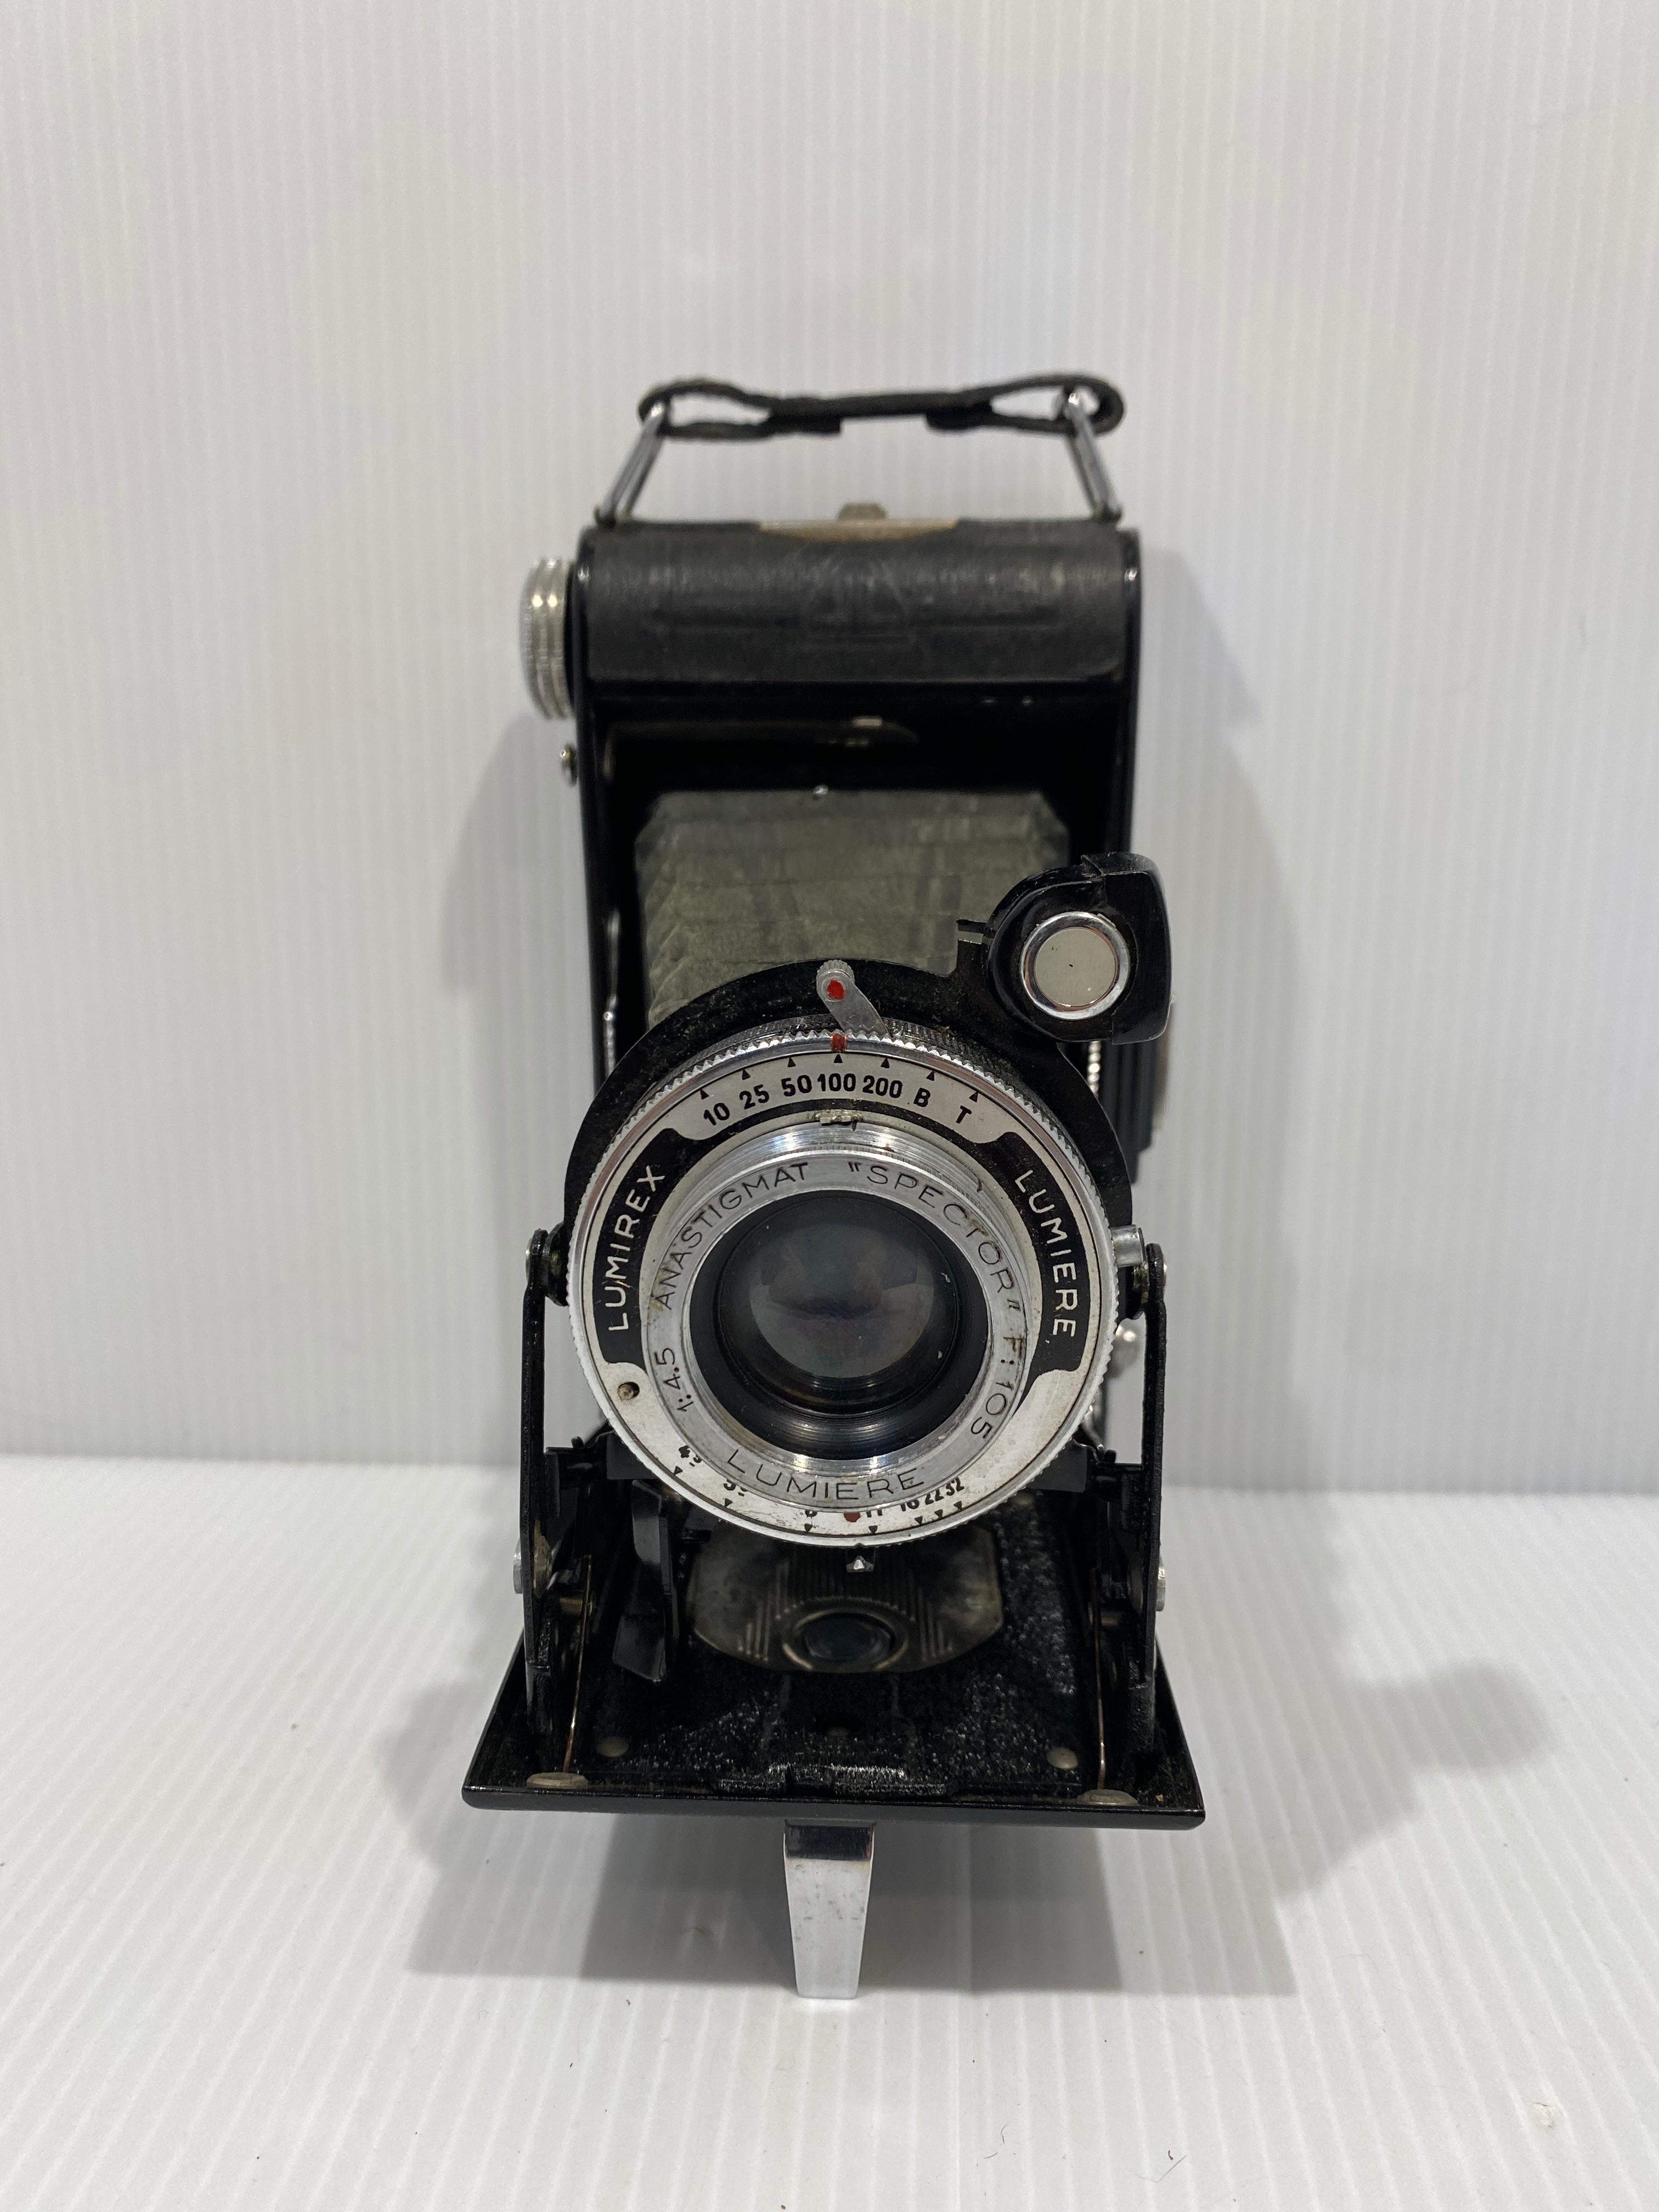 Antique folding camera, Lumirex Lumier. Made in France 1935-1940